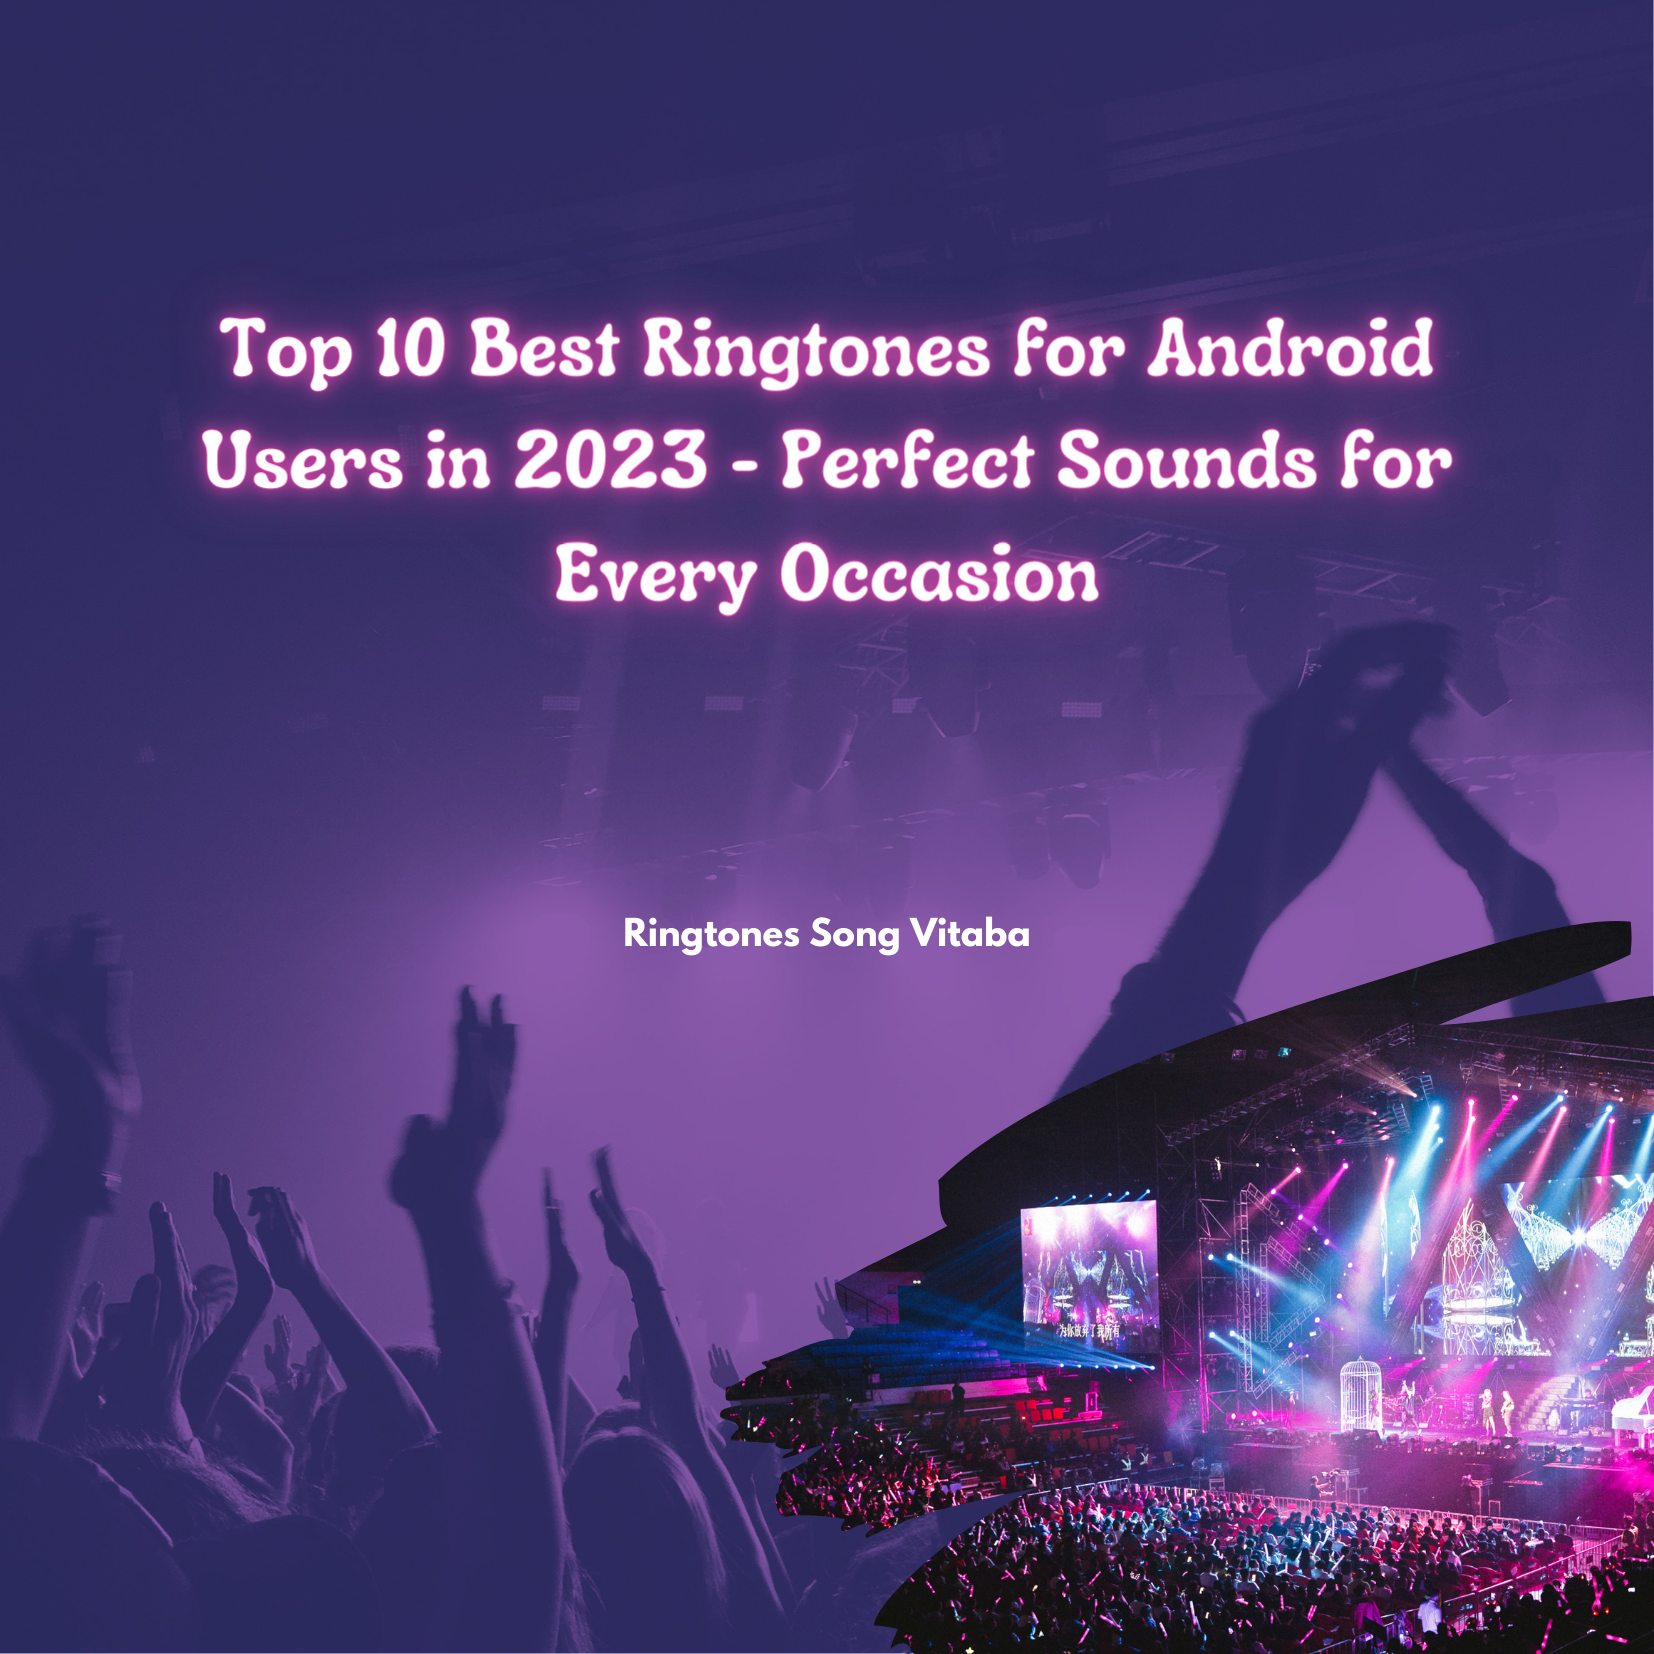 grundigt Umeki kam Top 10 Best Ringtones for Android Users in 2023 - Perfect Sounds for Every  Occasion